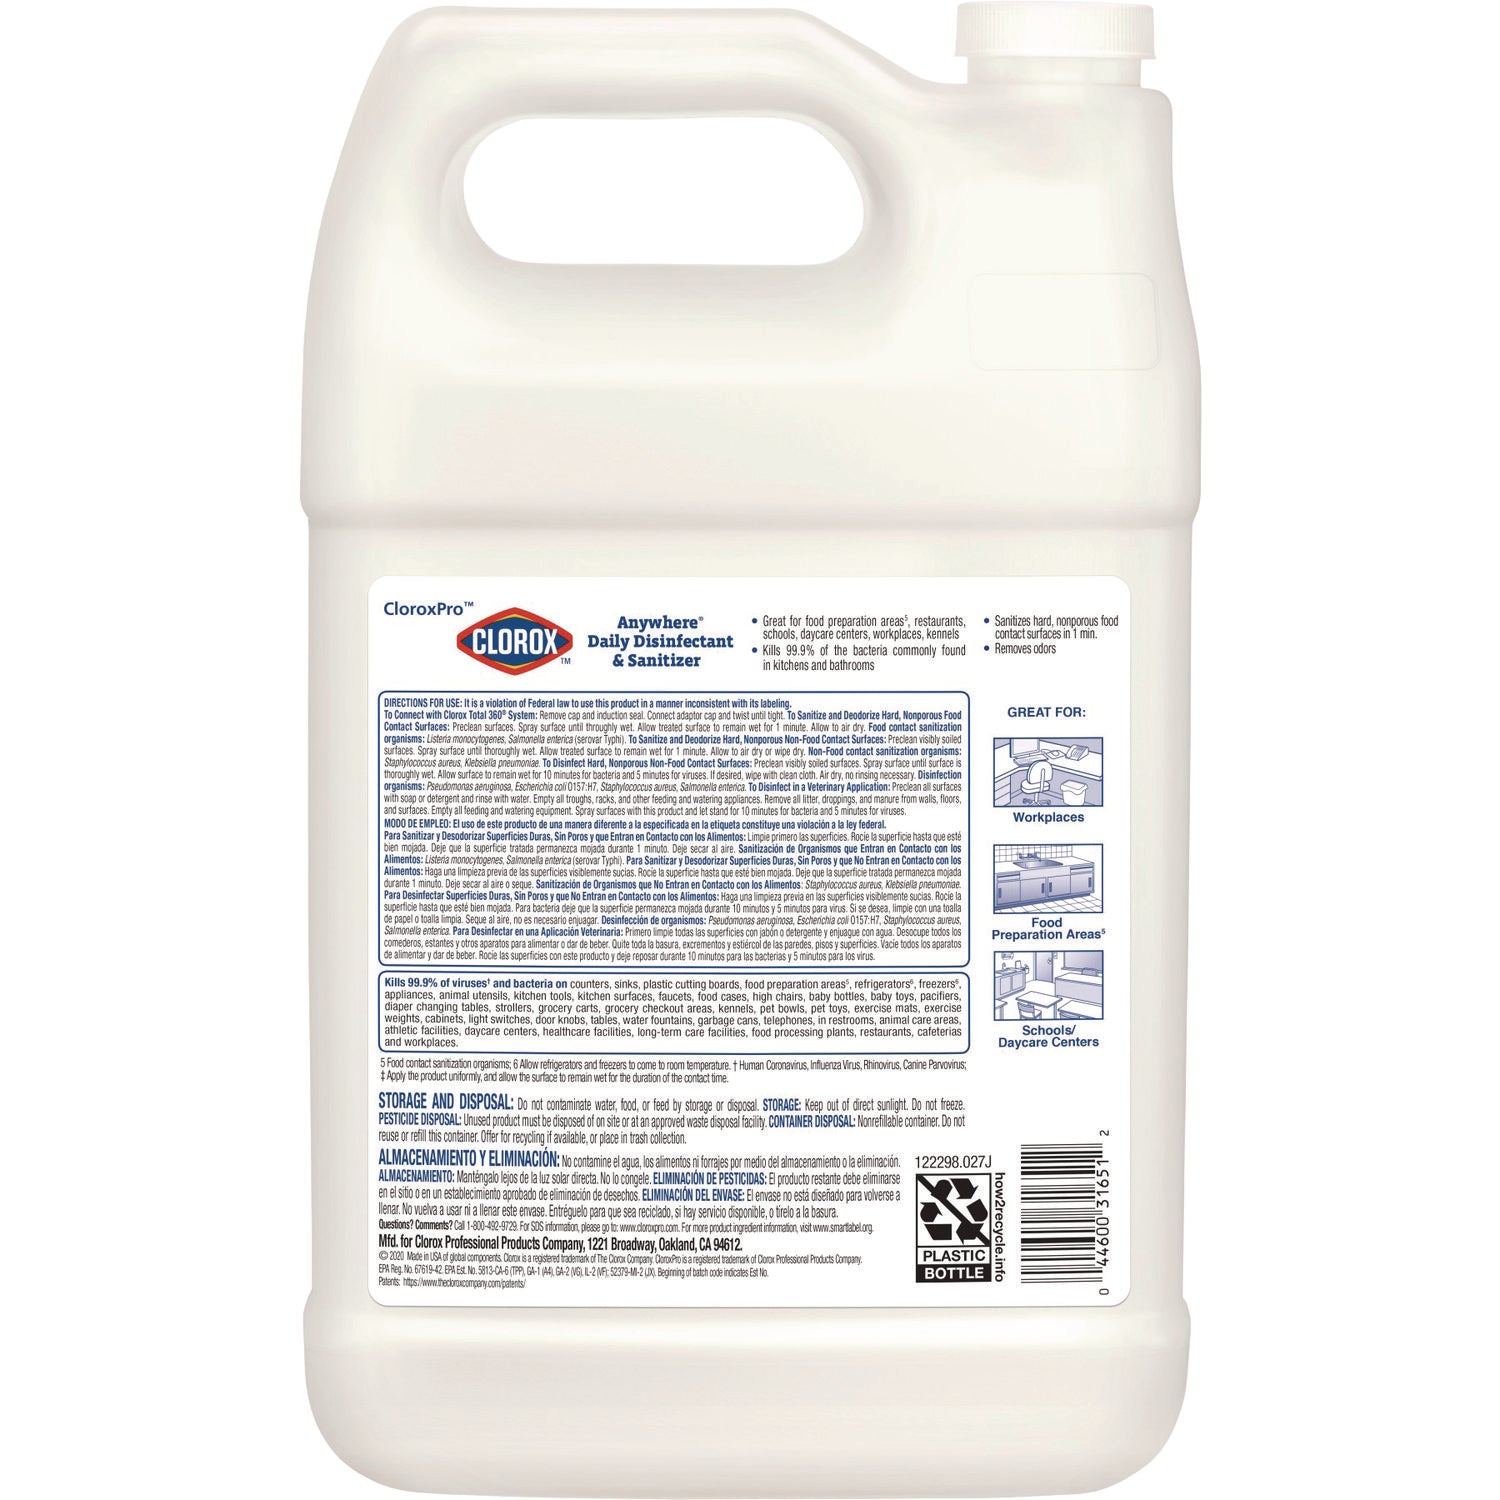 CloroxPro Anywhere Daily Disinfectant and Sanitizing Bottle - 128 fl oz (4 quart) - 1 Each - Disinfectant, Deodorize, pH Balanced - Translucent - 4